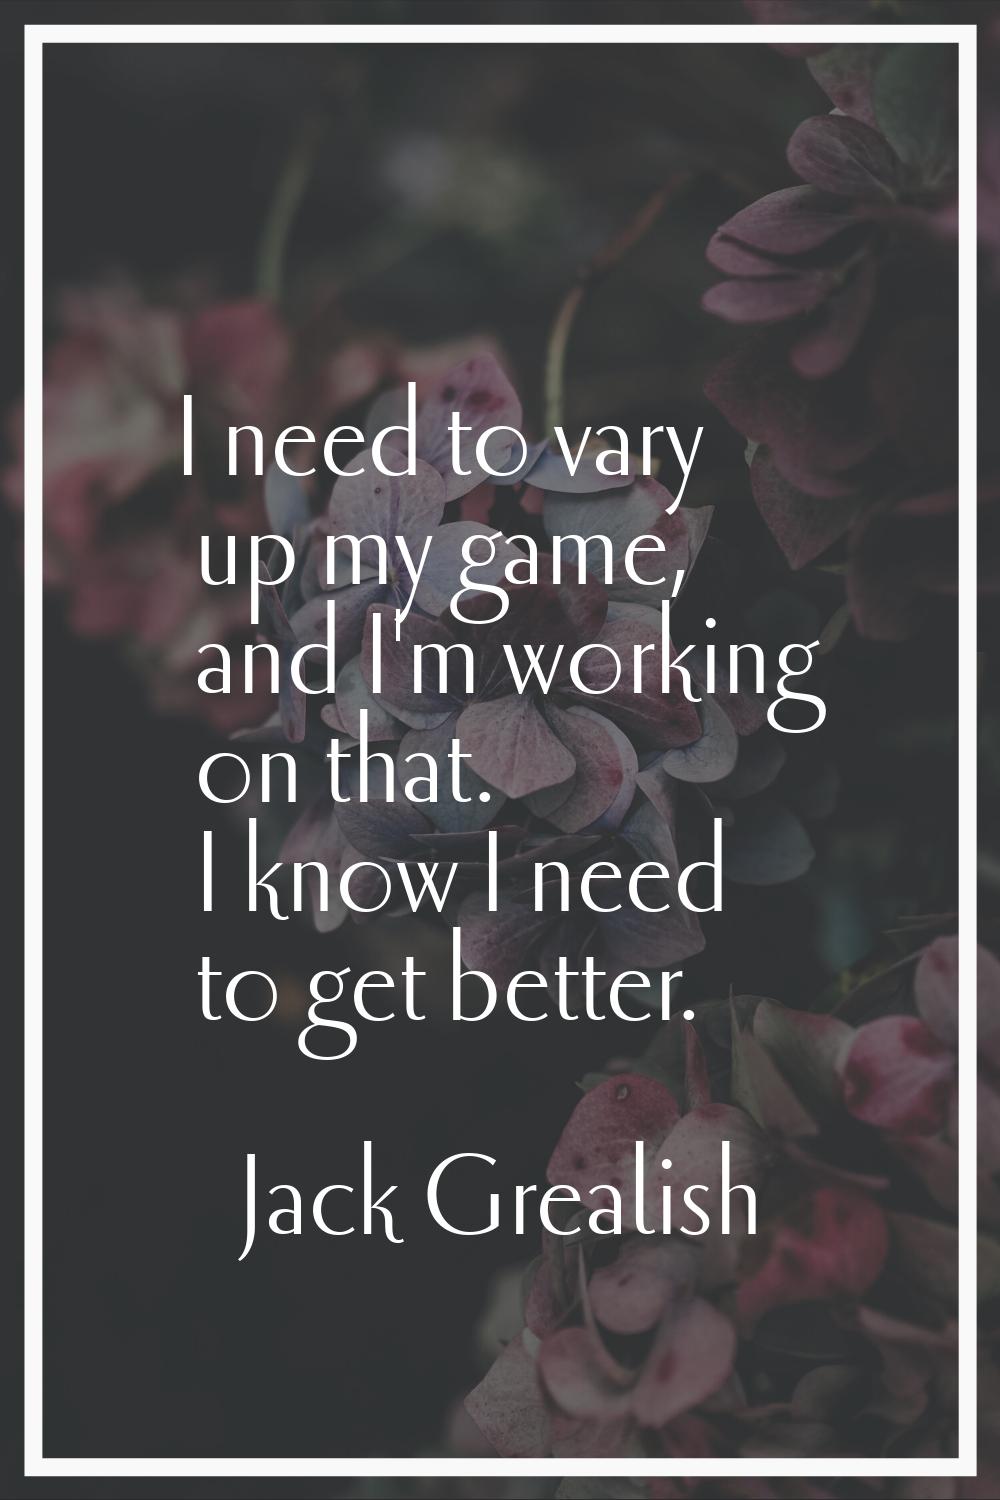 I need to vary up my game, and I'm working on that. I know I need to get better.